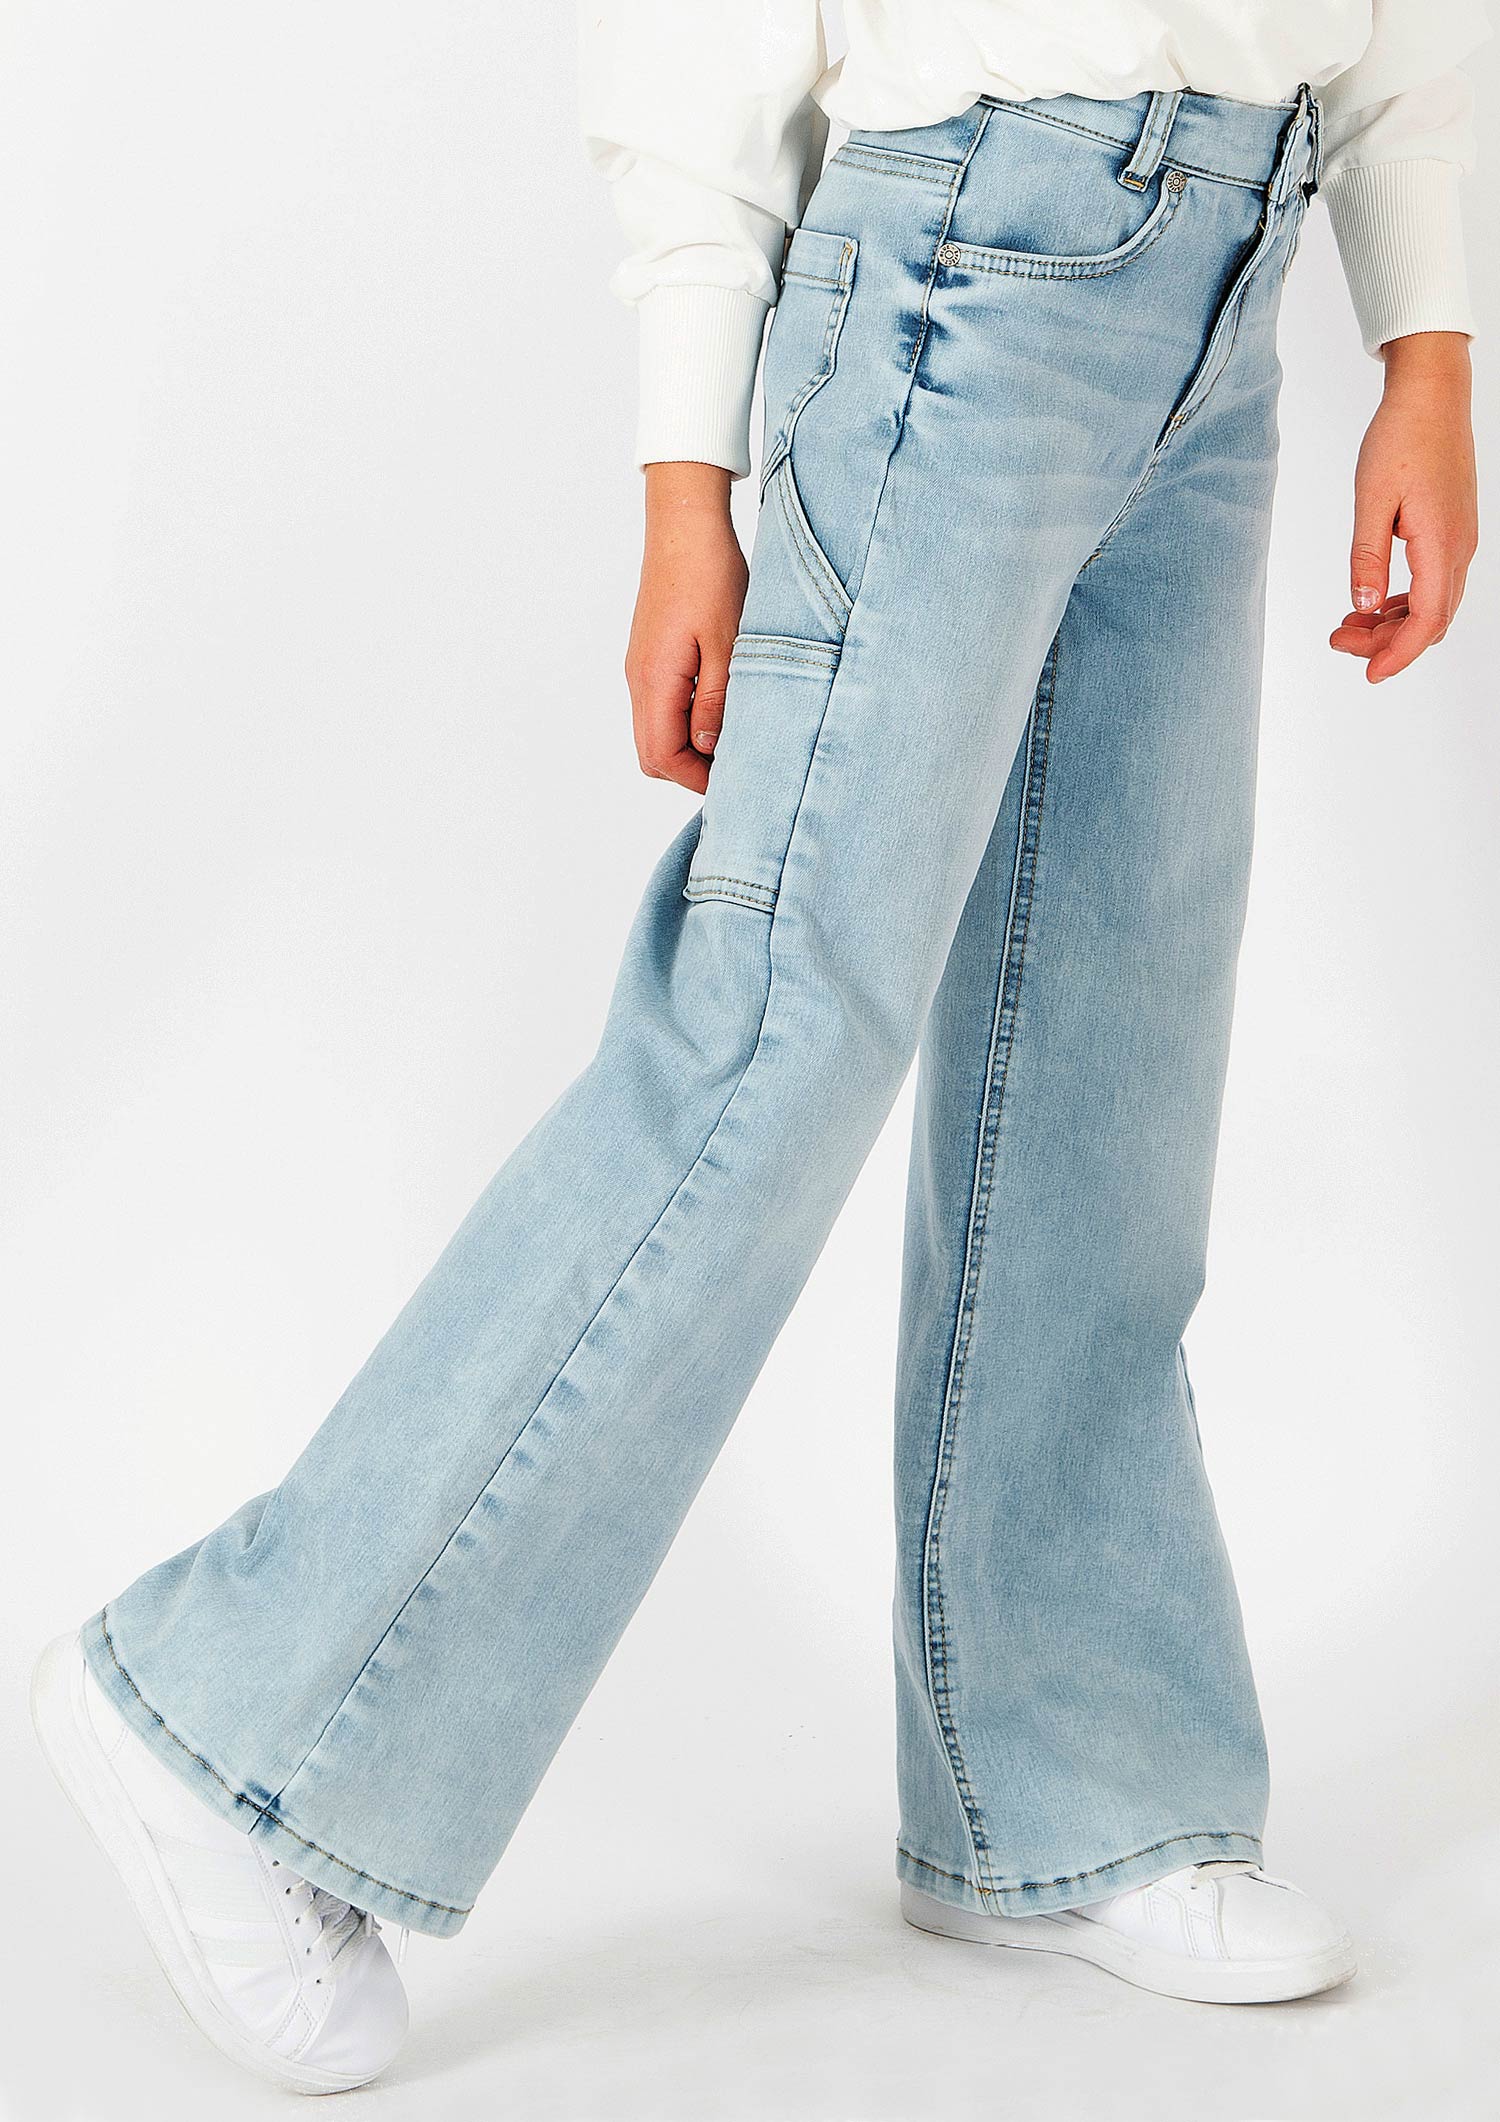 1377-Girls Wide Leg Jeans Worker Style, available in slim, normal, wide